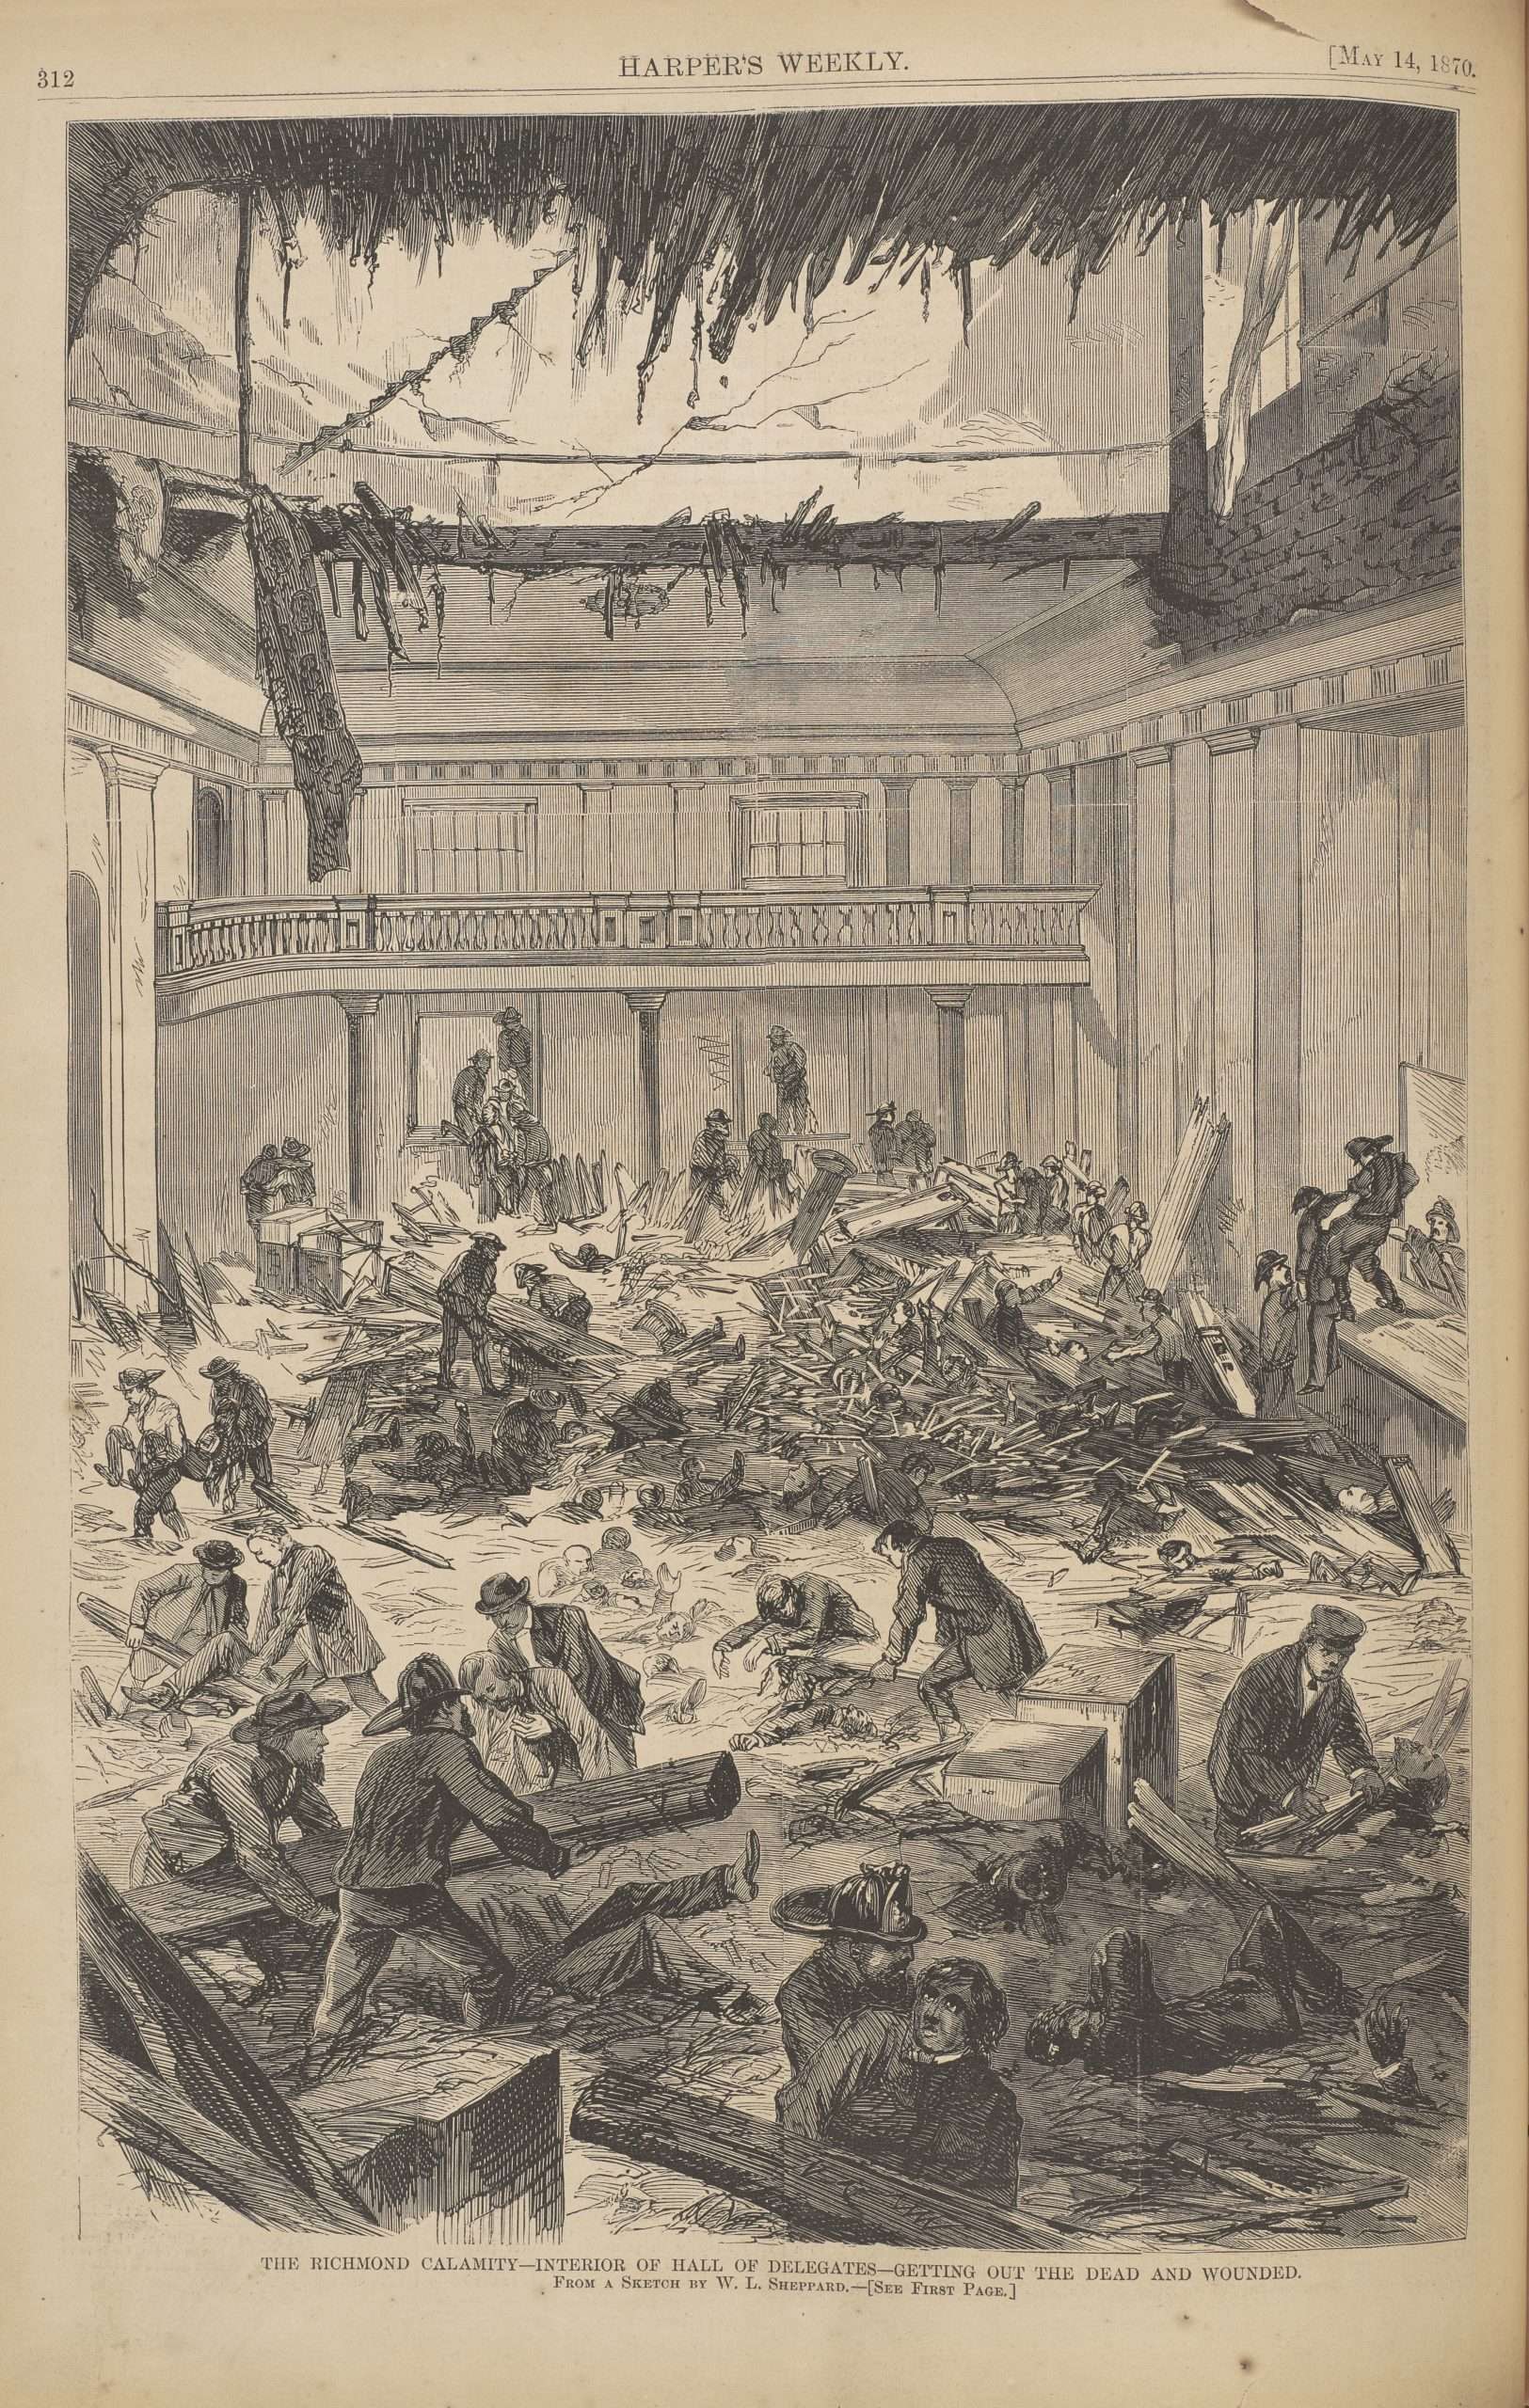 “The Richmond Calamity”: The Capitol Collapse of 1870